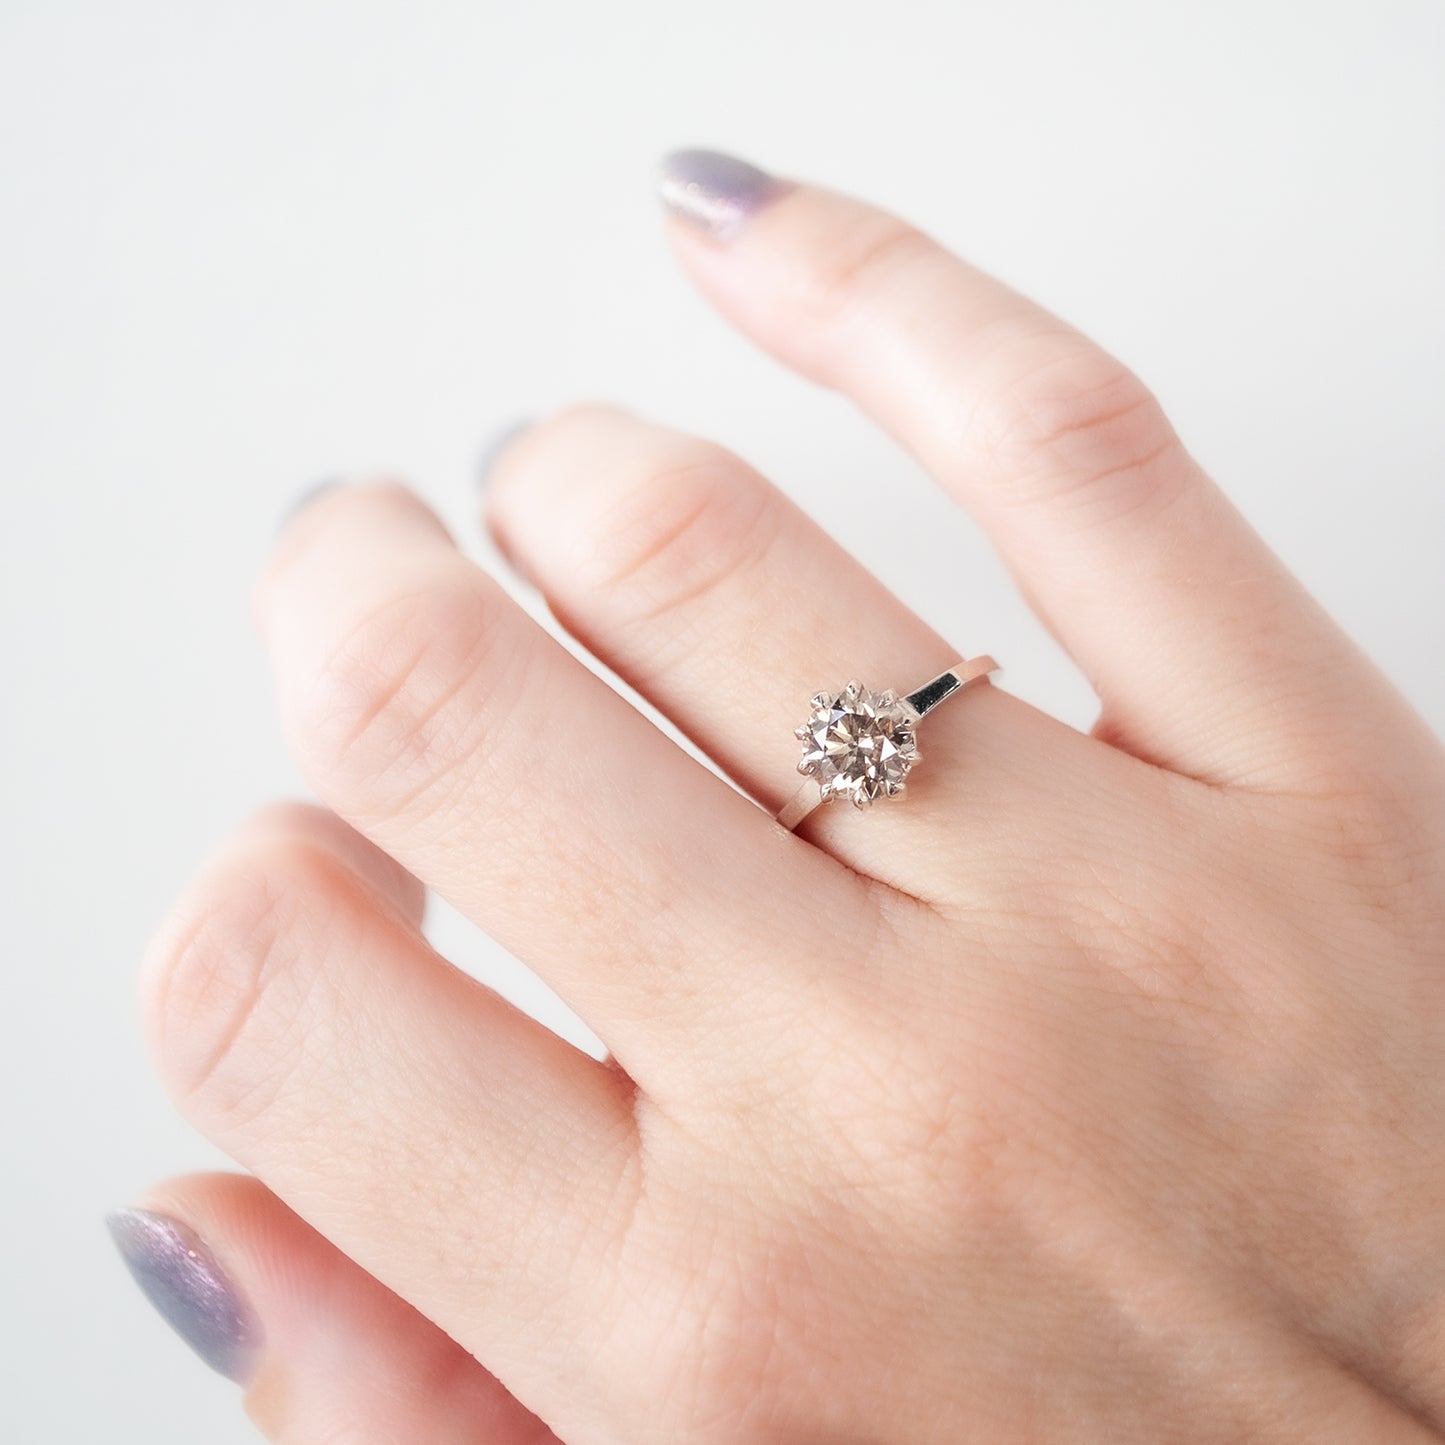 North Star Solitaire Ring